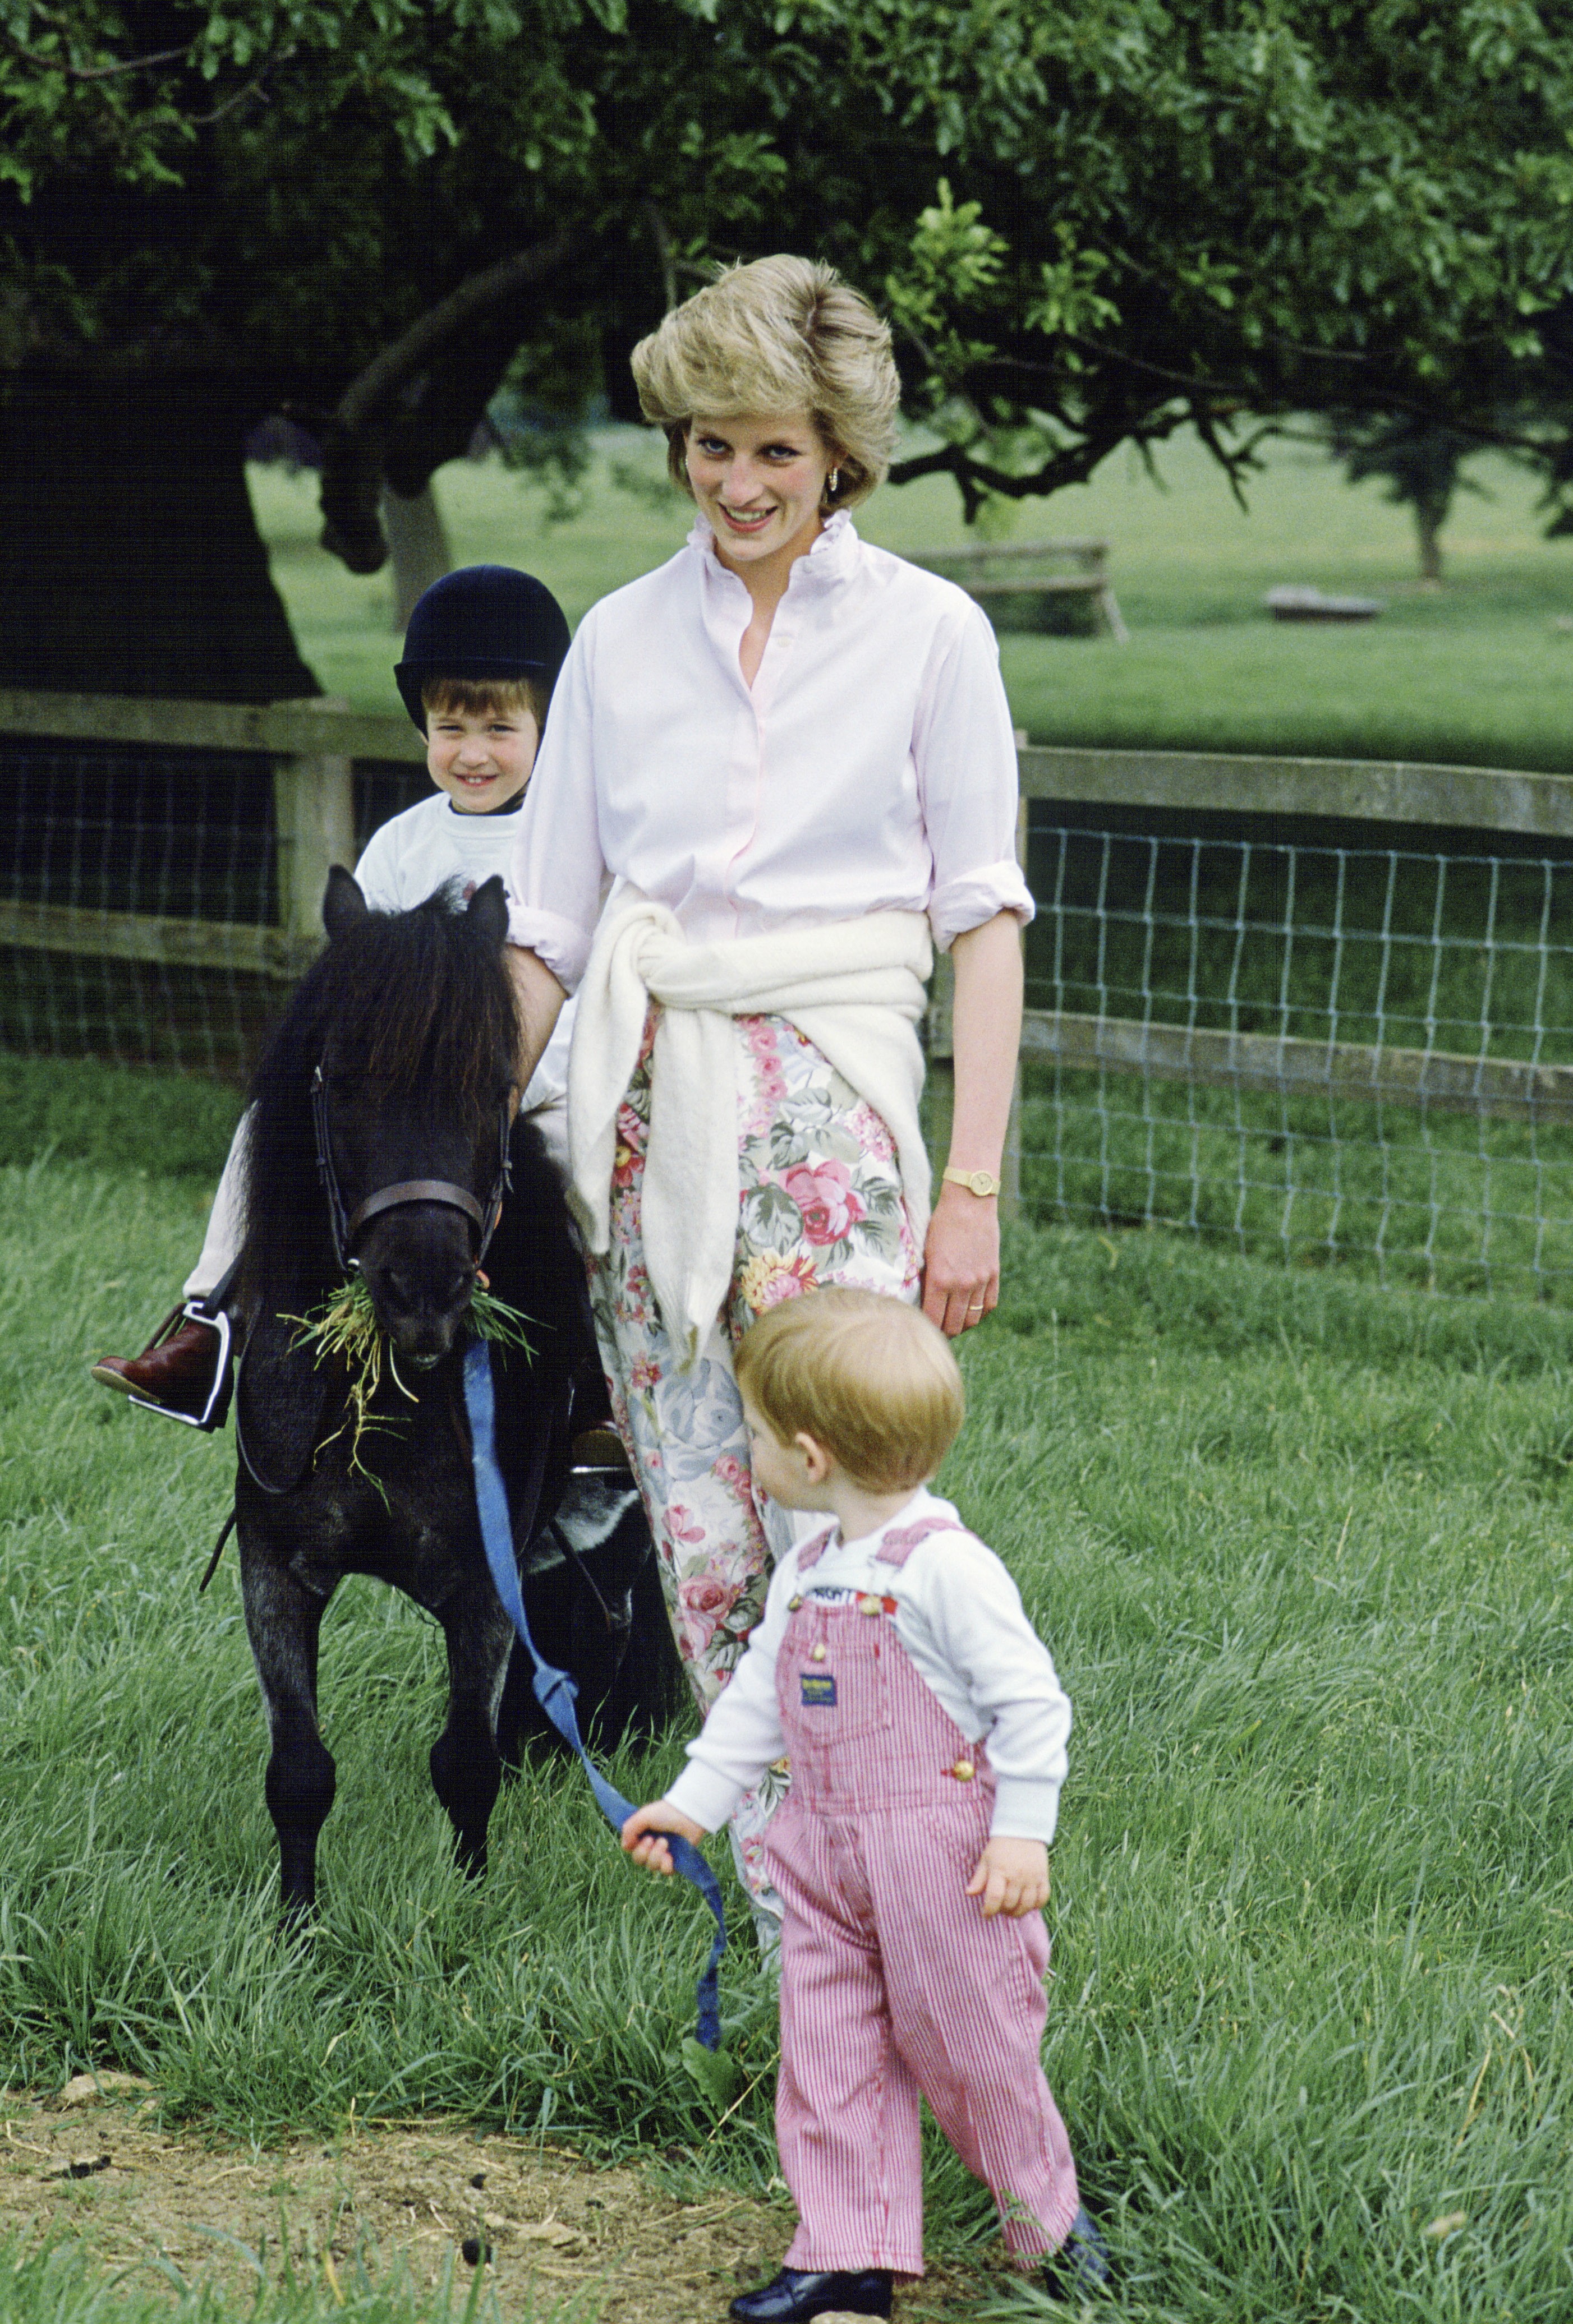 1986 Floral trousers meant playtime at Highgrove. (Foto: Tim Graham Photo Library via Get)